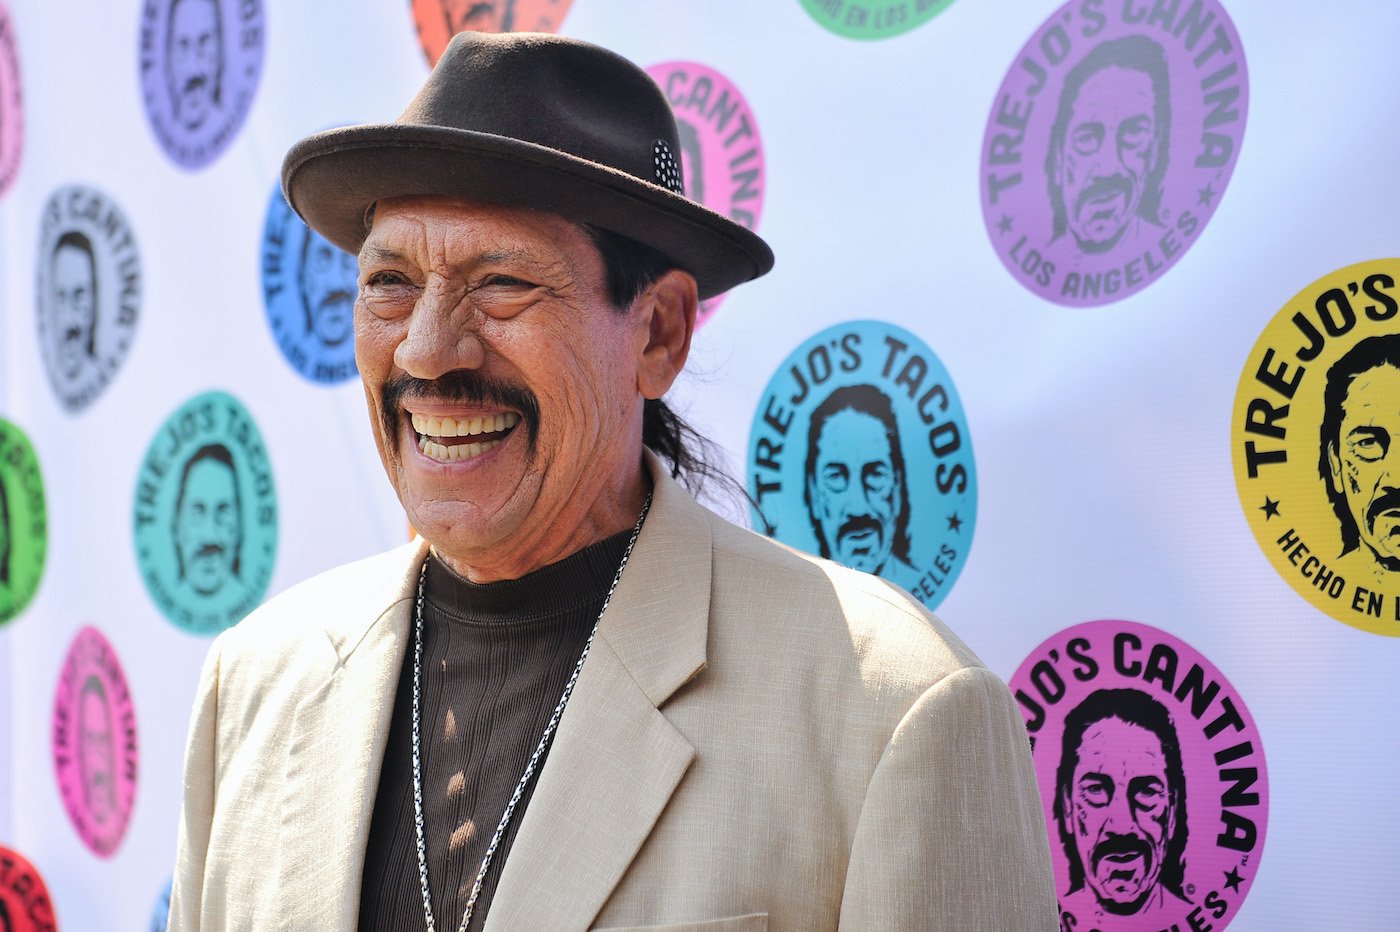 Danny Trejo, who is the guest judge in an upcoming 'Hell's Kitchen' smiles on the red carpet